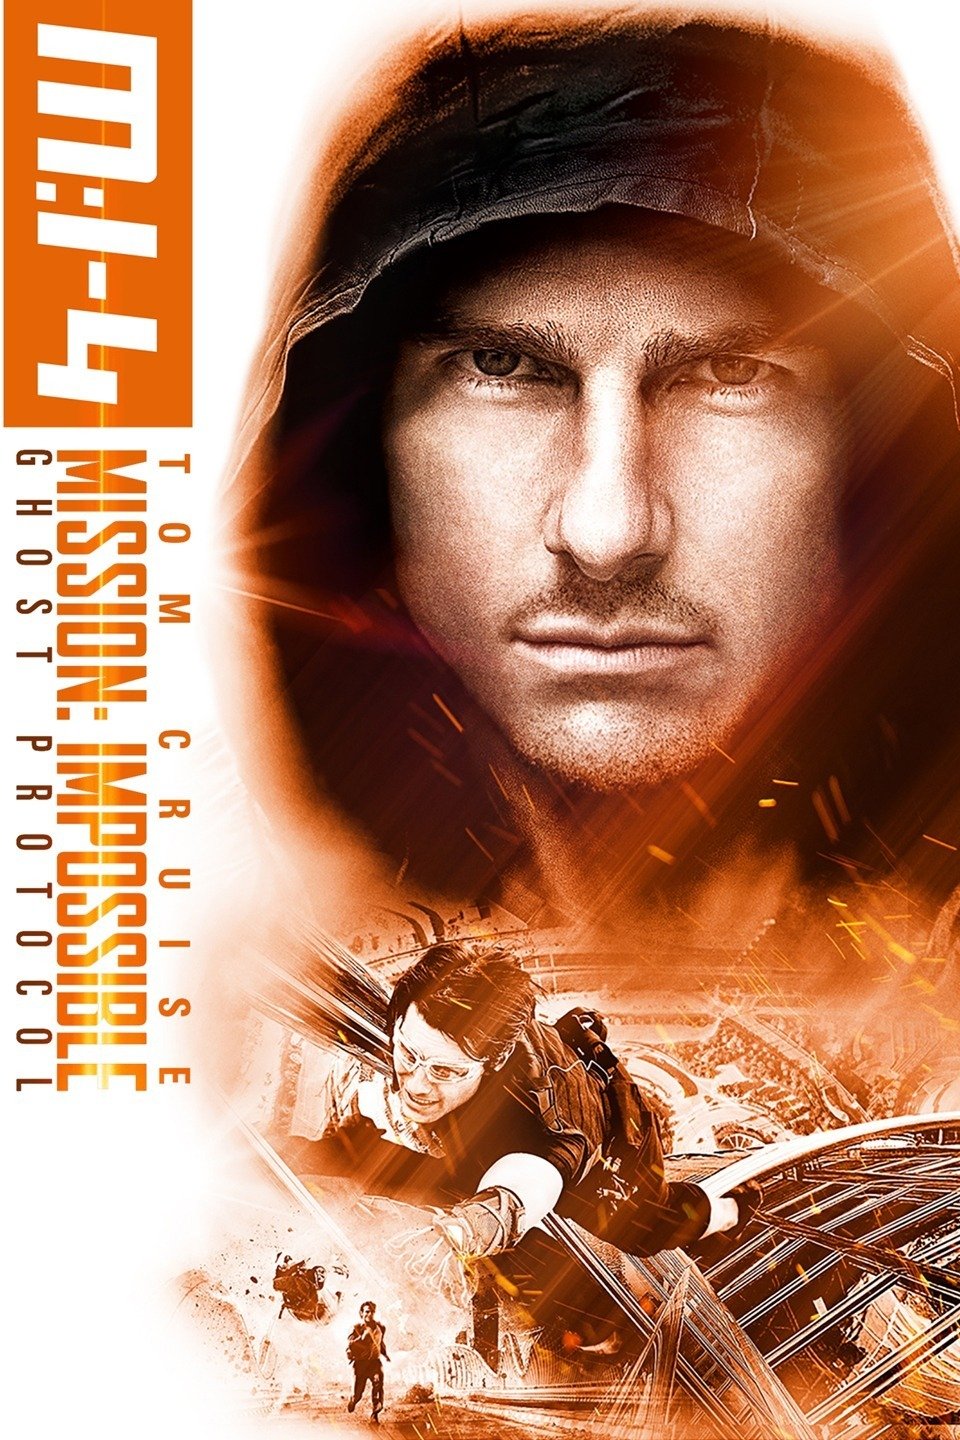 mission impossible 5 watch online free